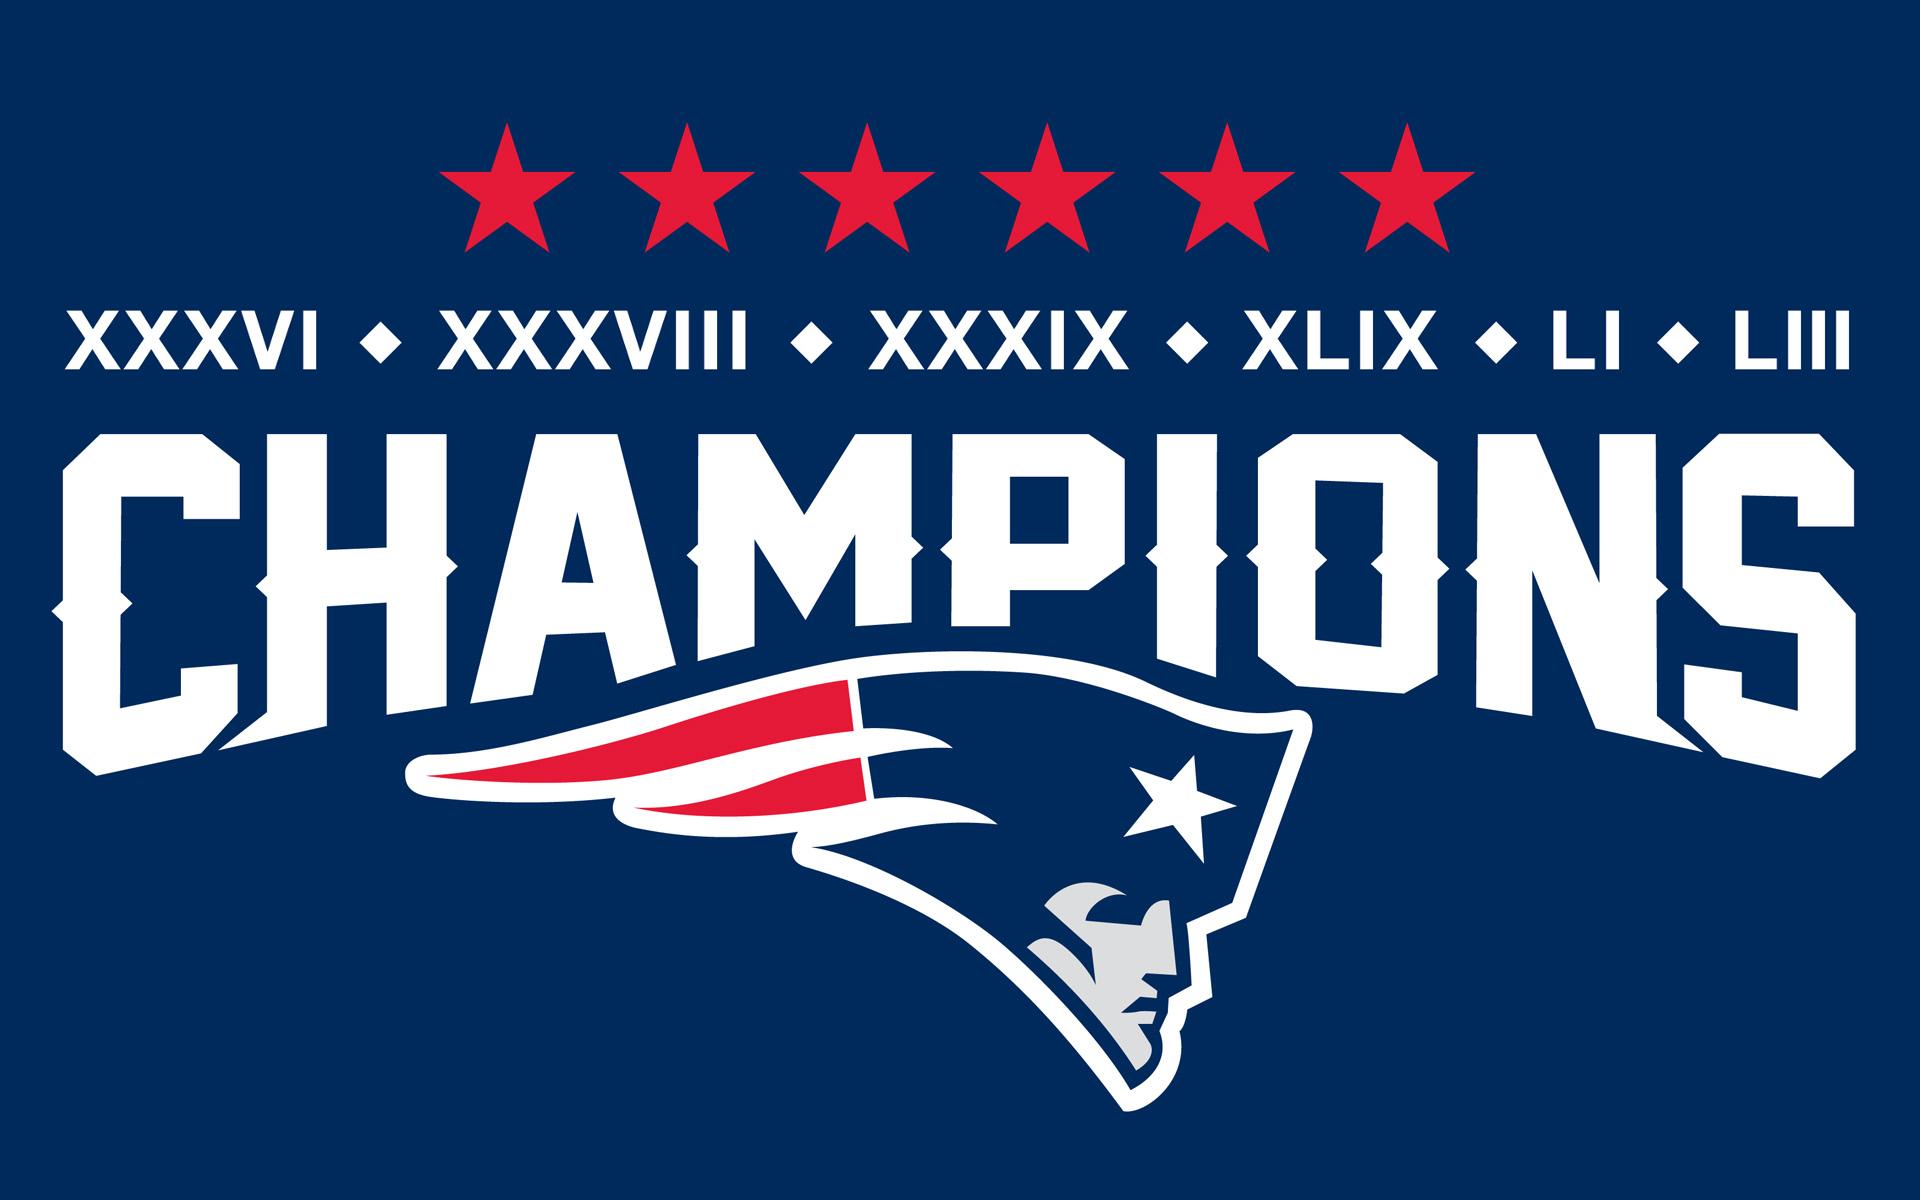 6X Superbowl Champions! (Phone Wallpaper in comments)